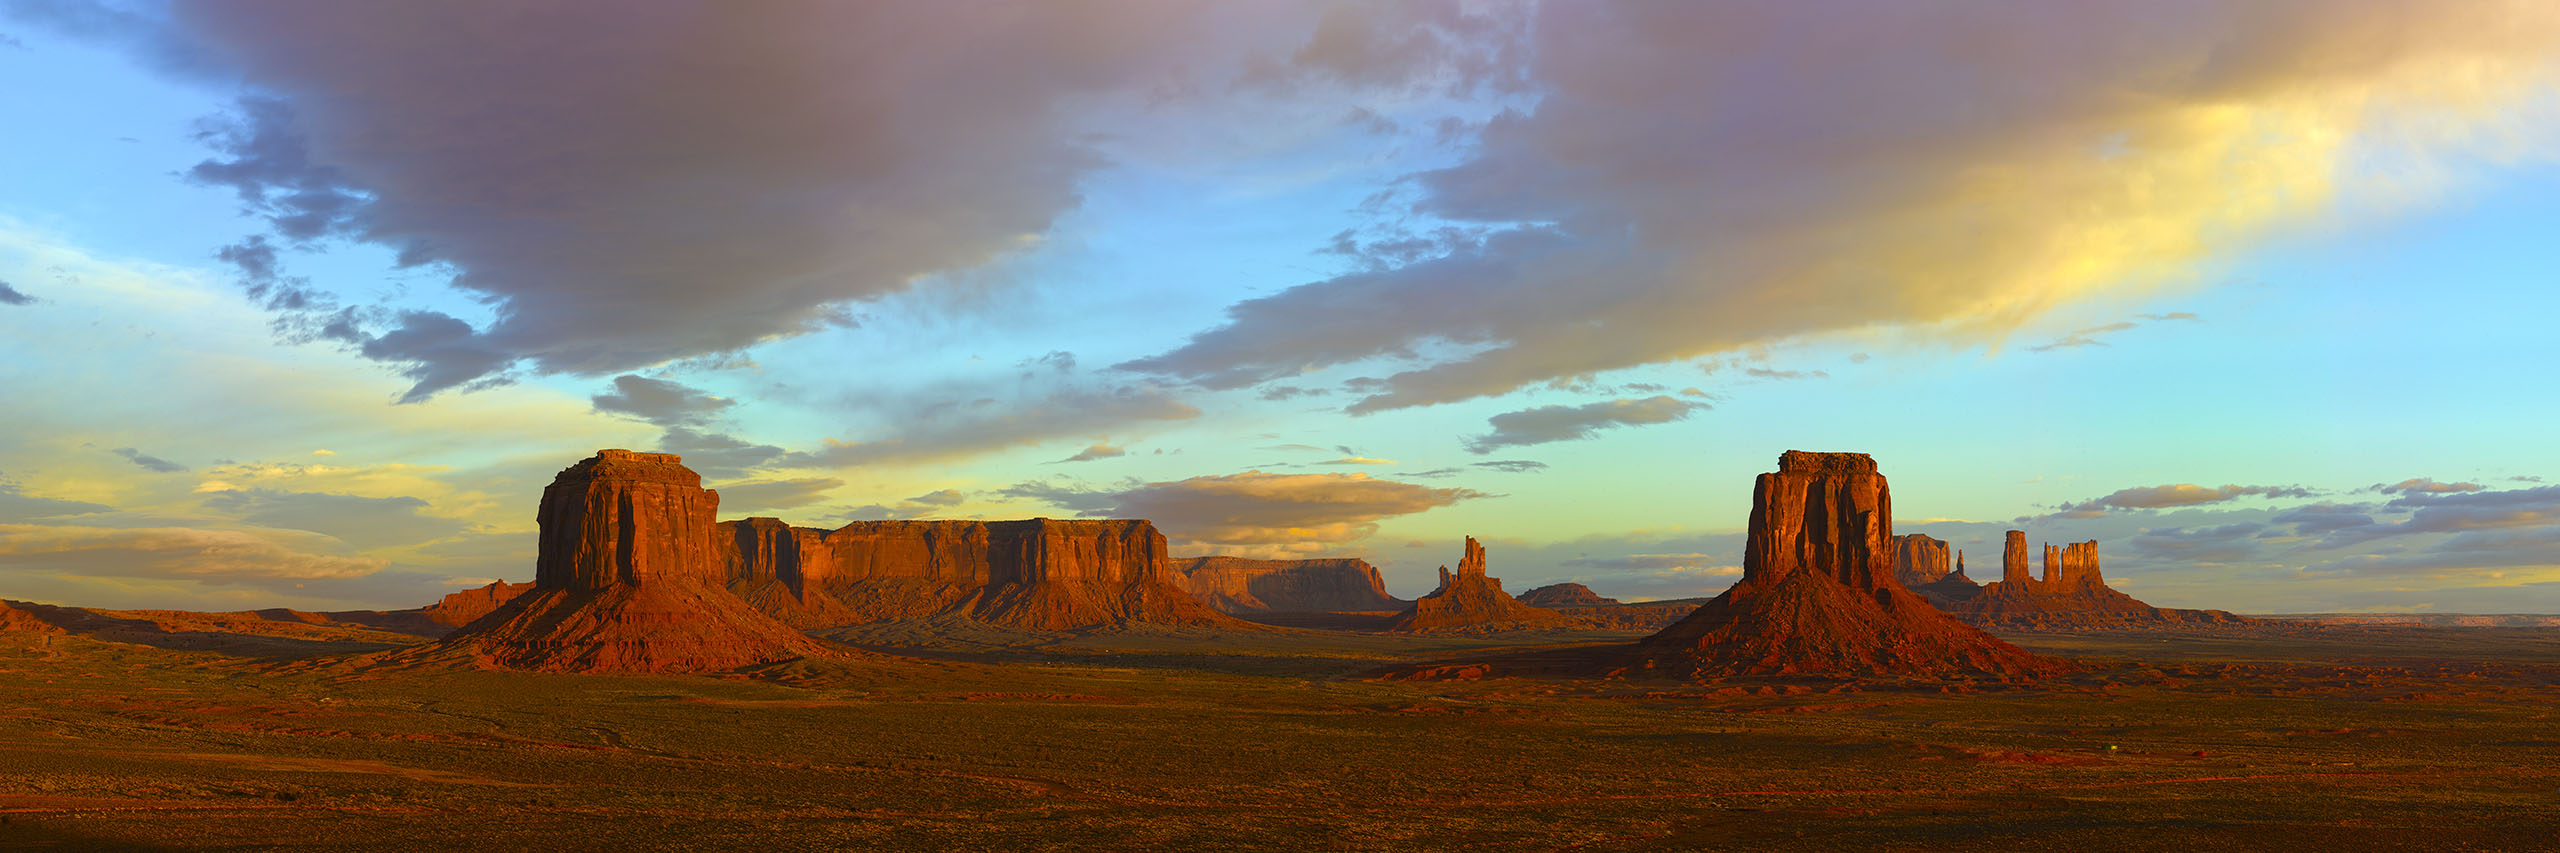 Monument Valley sunrise from Artist's Point Navajo Lands